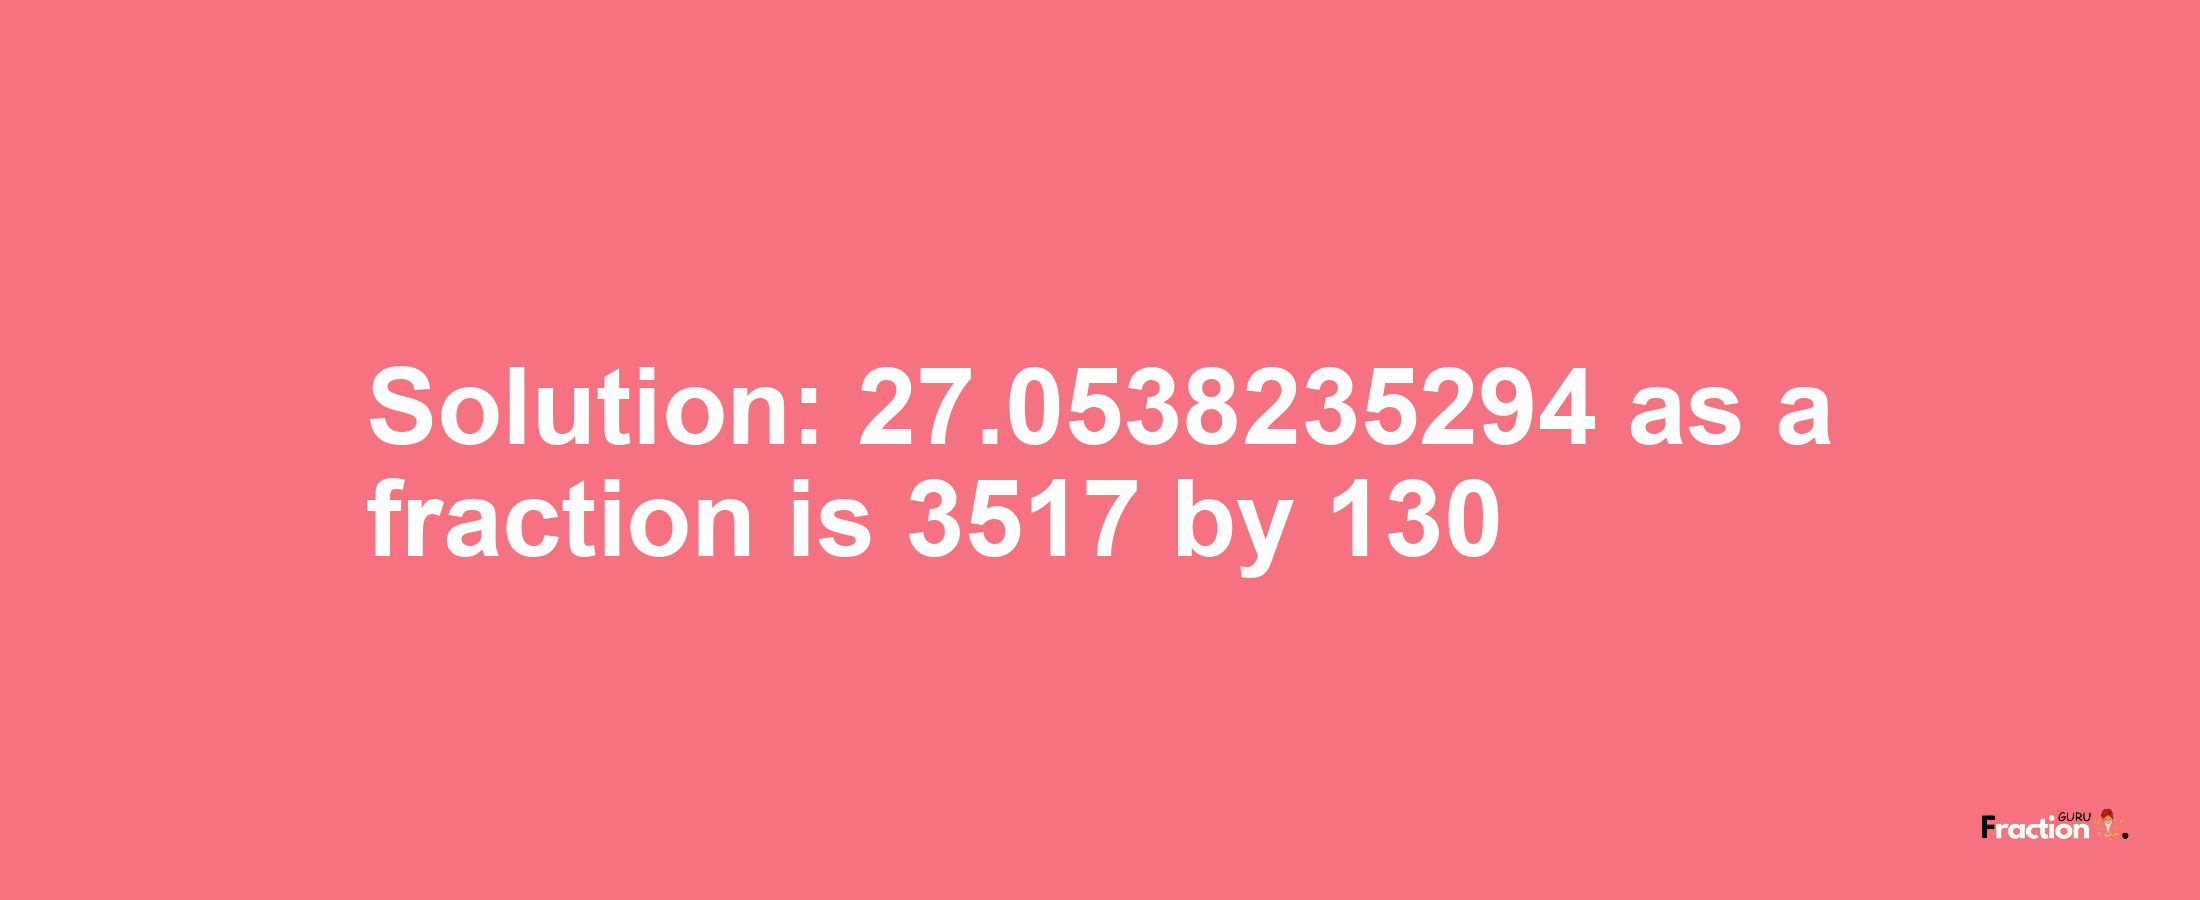 Solution:27.0538235294 as a fraction is 3517/130